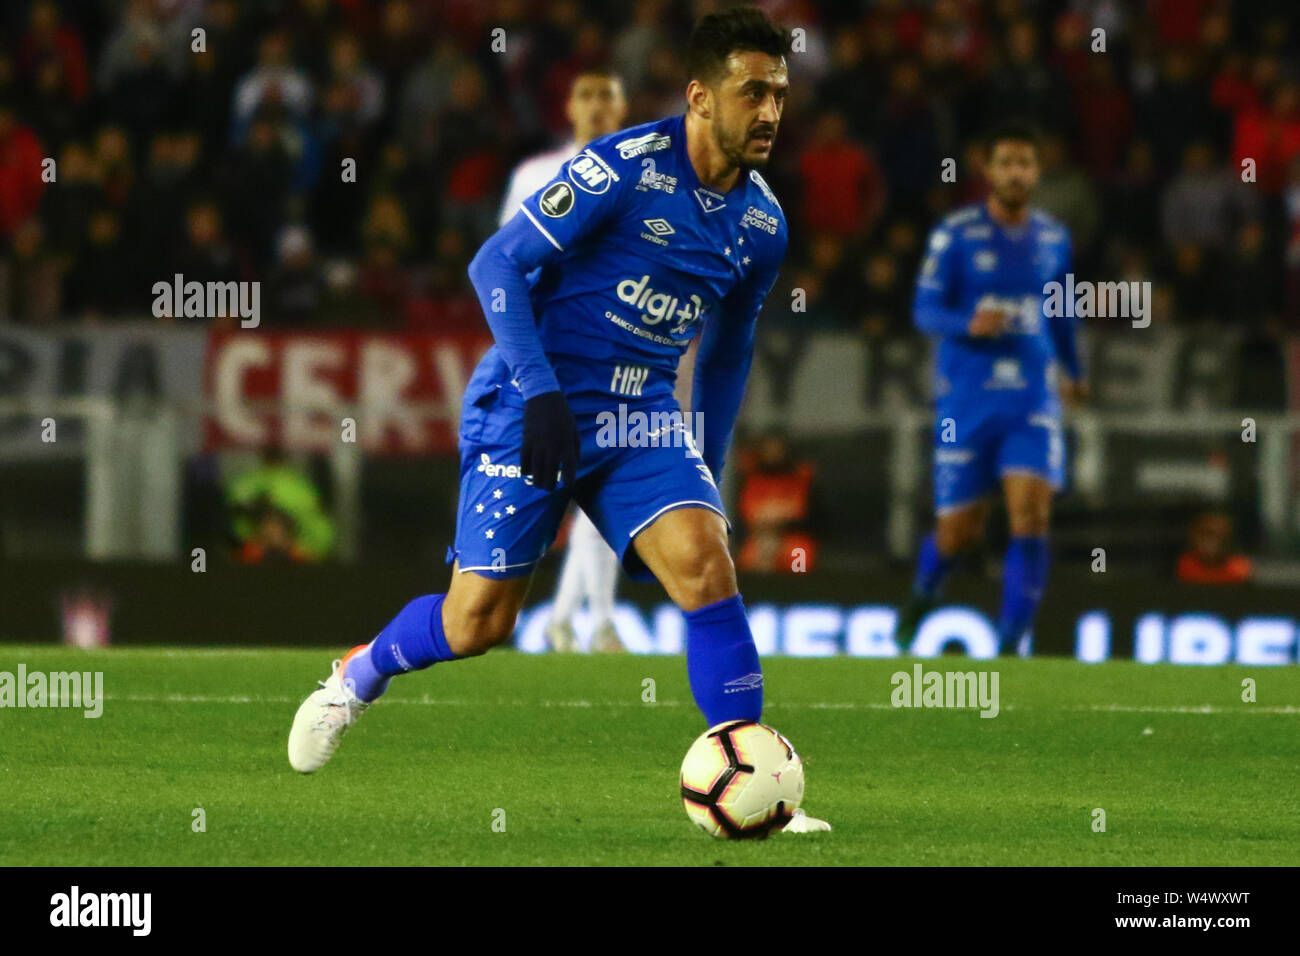 BUENOS AIRES, 23.07.2019: Robinho during the match between River Plate (ARG) and Cruzeiro (BRA) for match of Conmebol Libertadores on Monumental Stadi Stock Photo